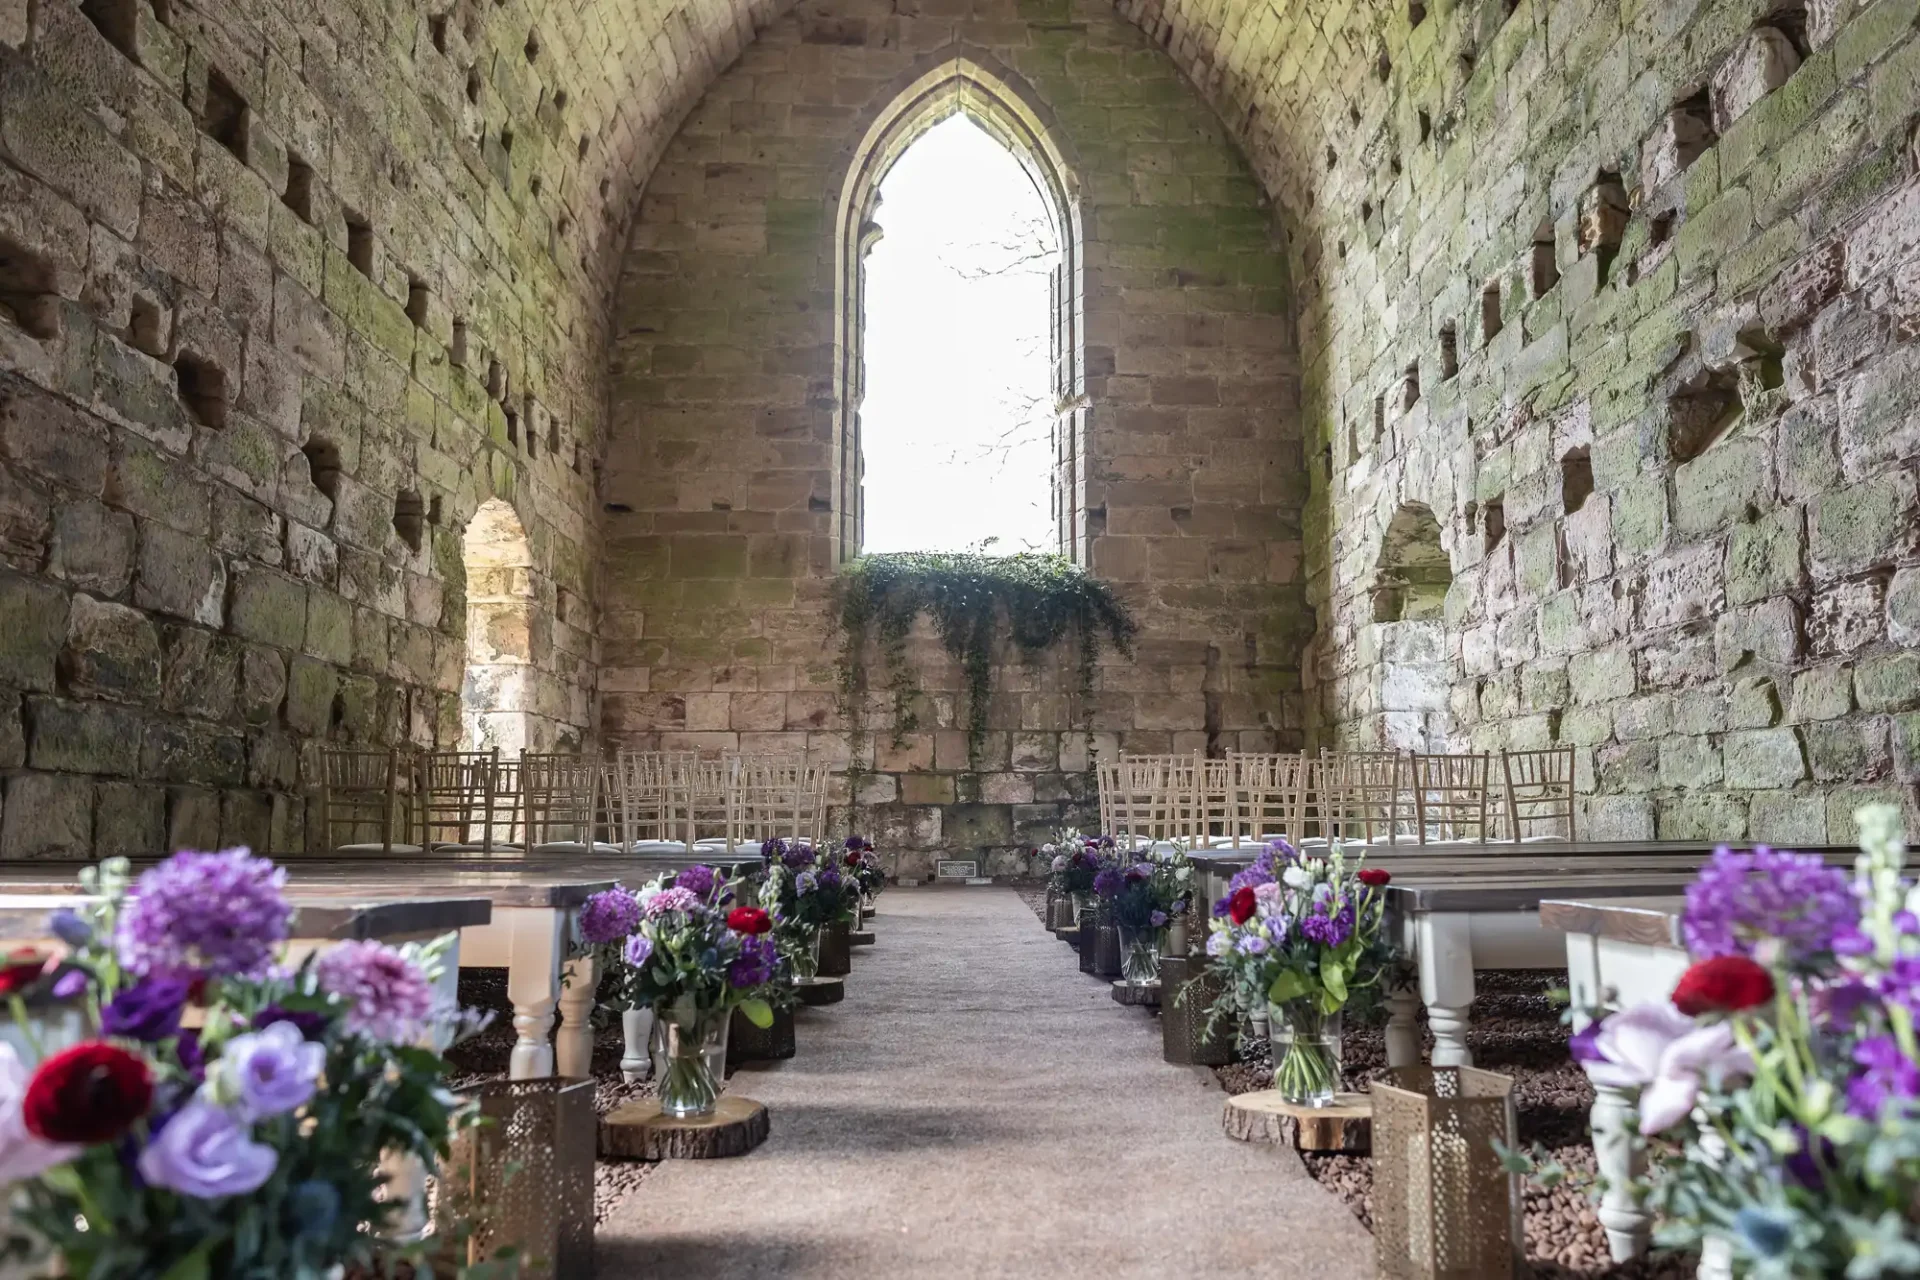 A rustic stone church interior with a high arched ceiling and arched window. The aisle is lined with bouquets of various flowers, and wooden chairs are arranged on either side.